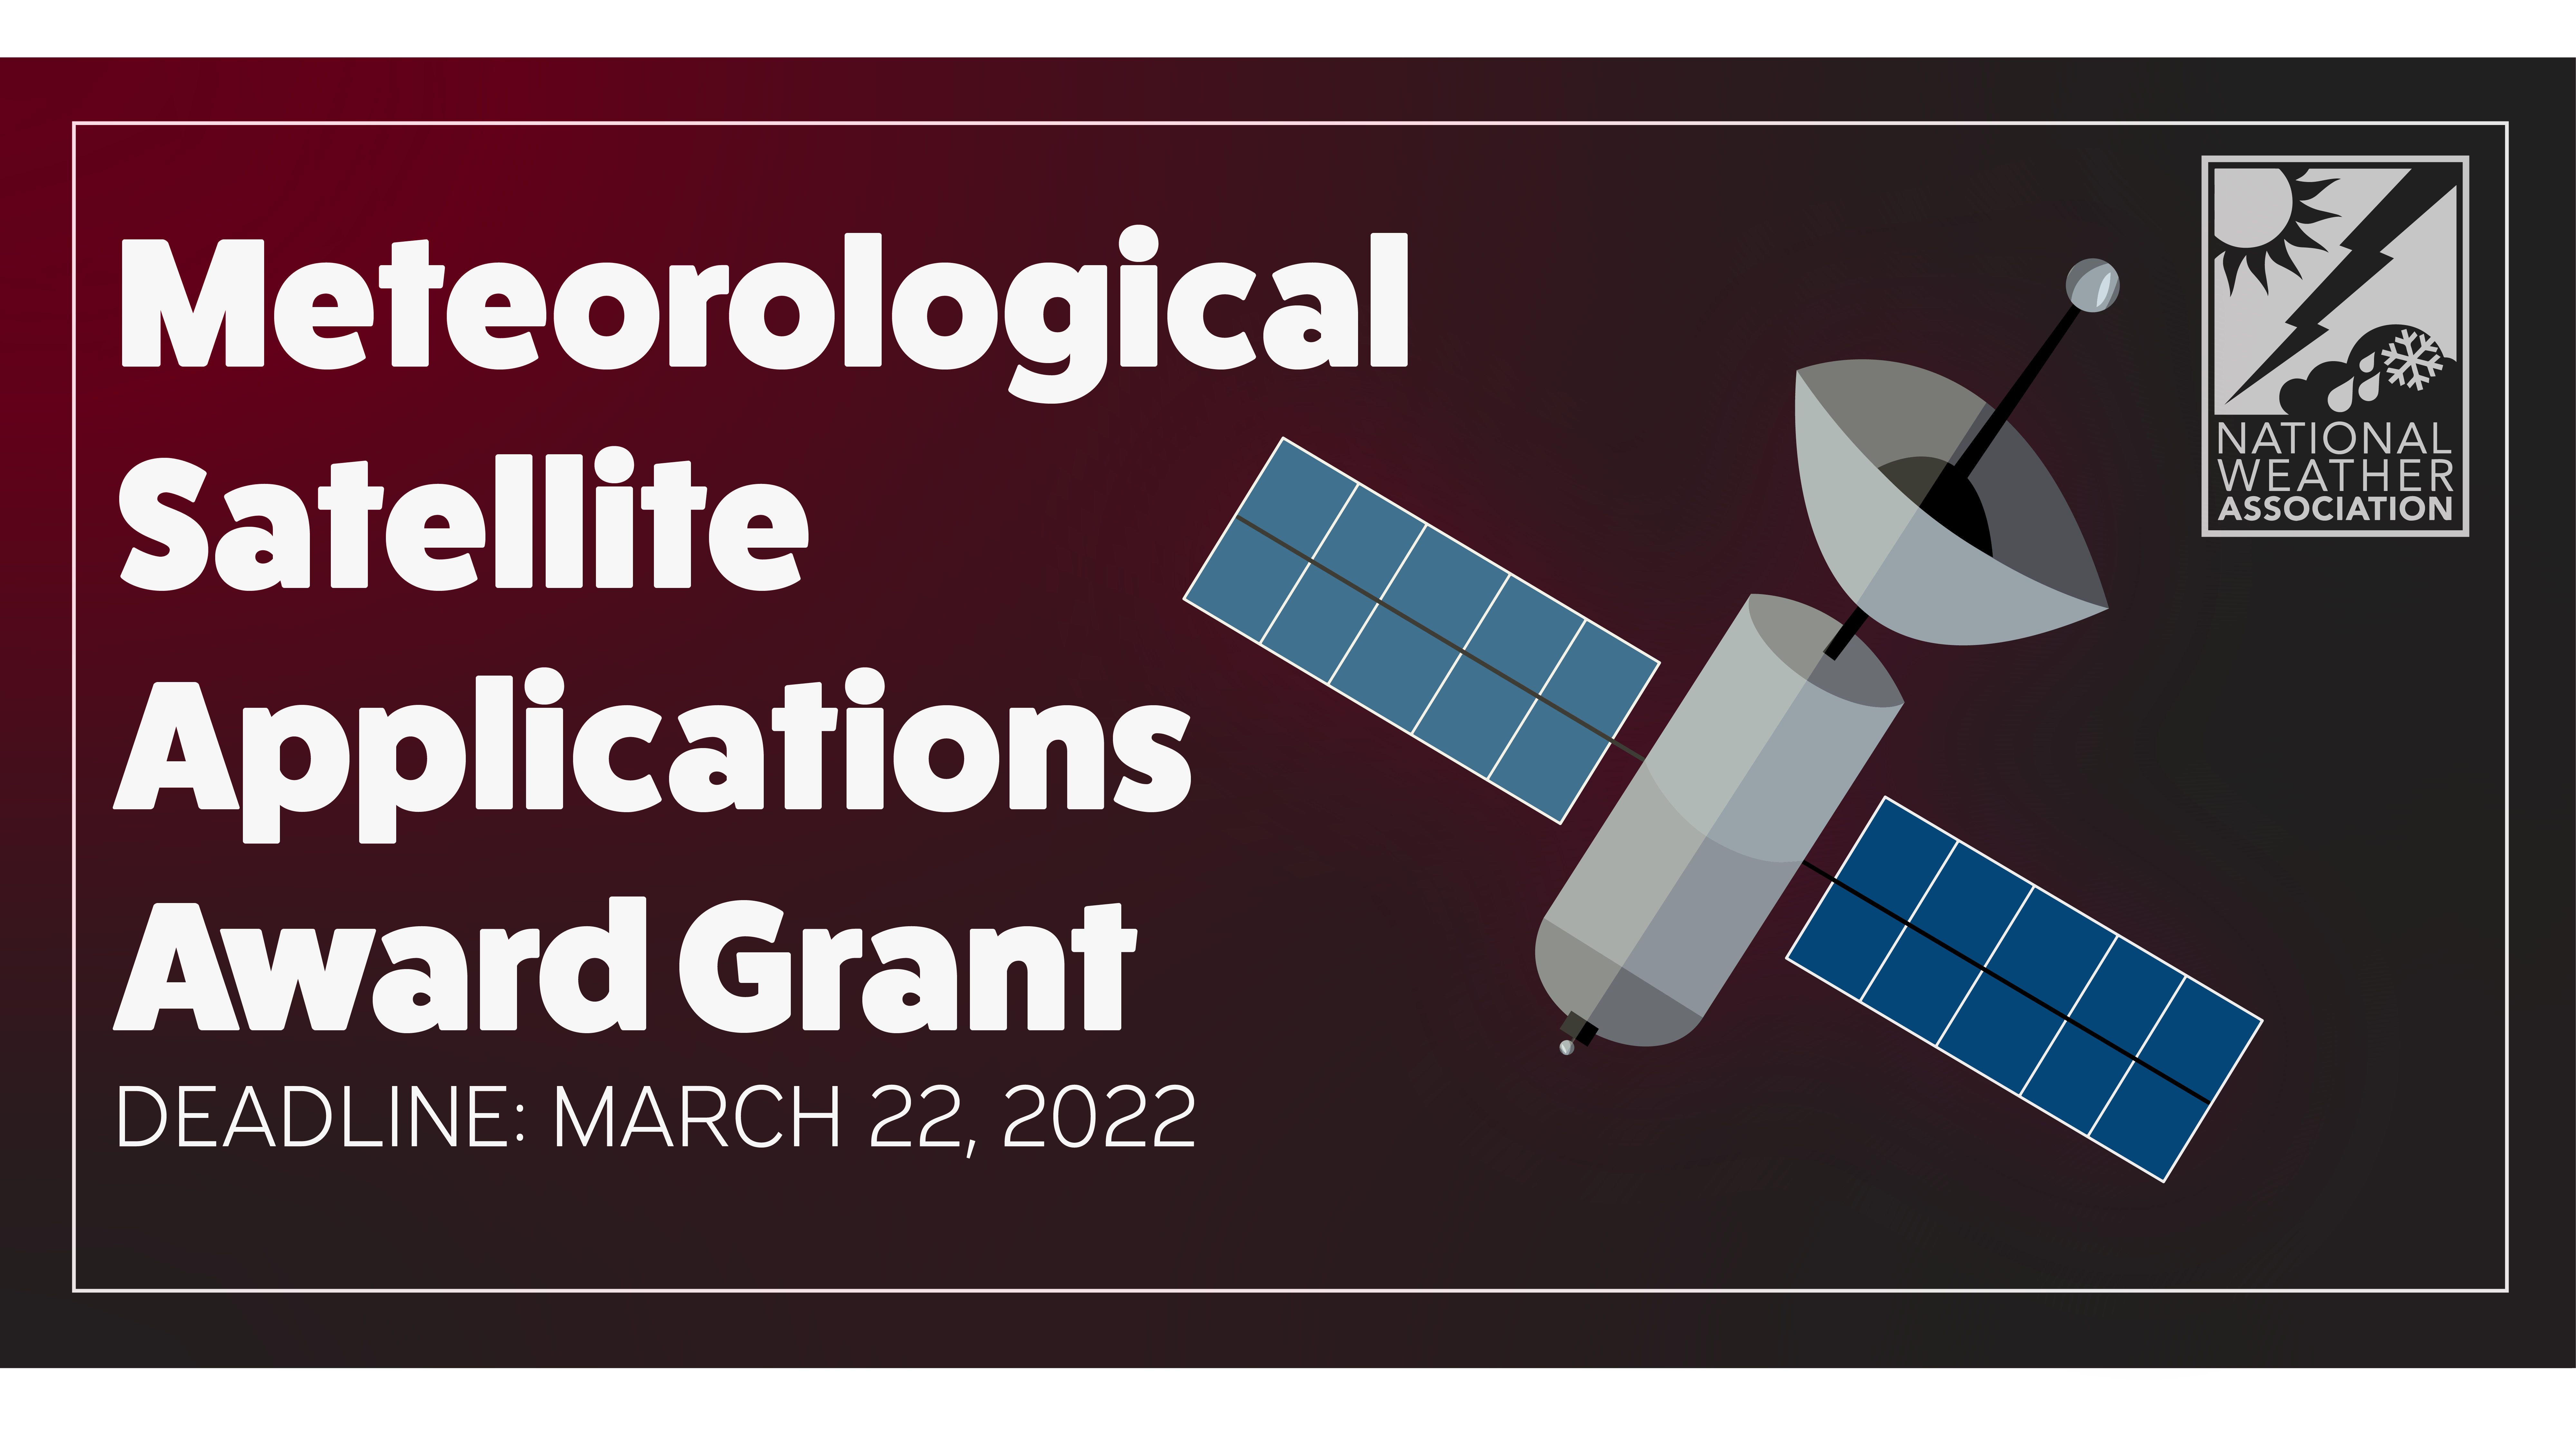 A graphic promoting the 2022 Meteorological Satellite Applications Award Grant Deadline: March 22 2022